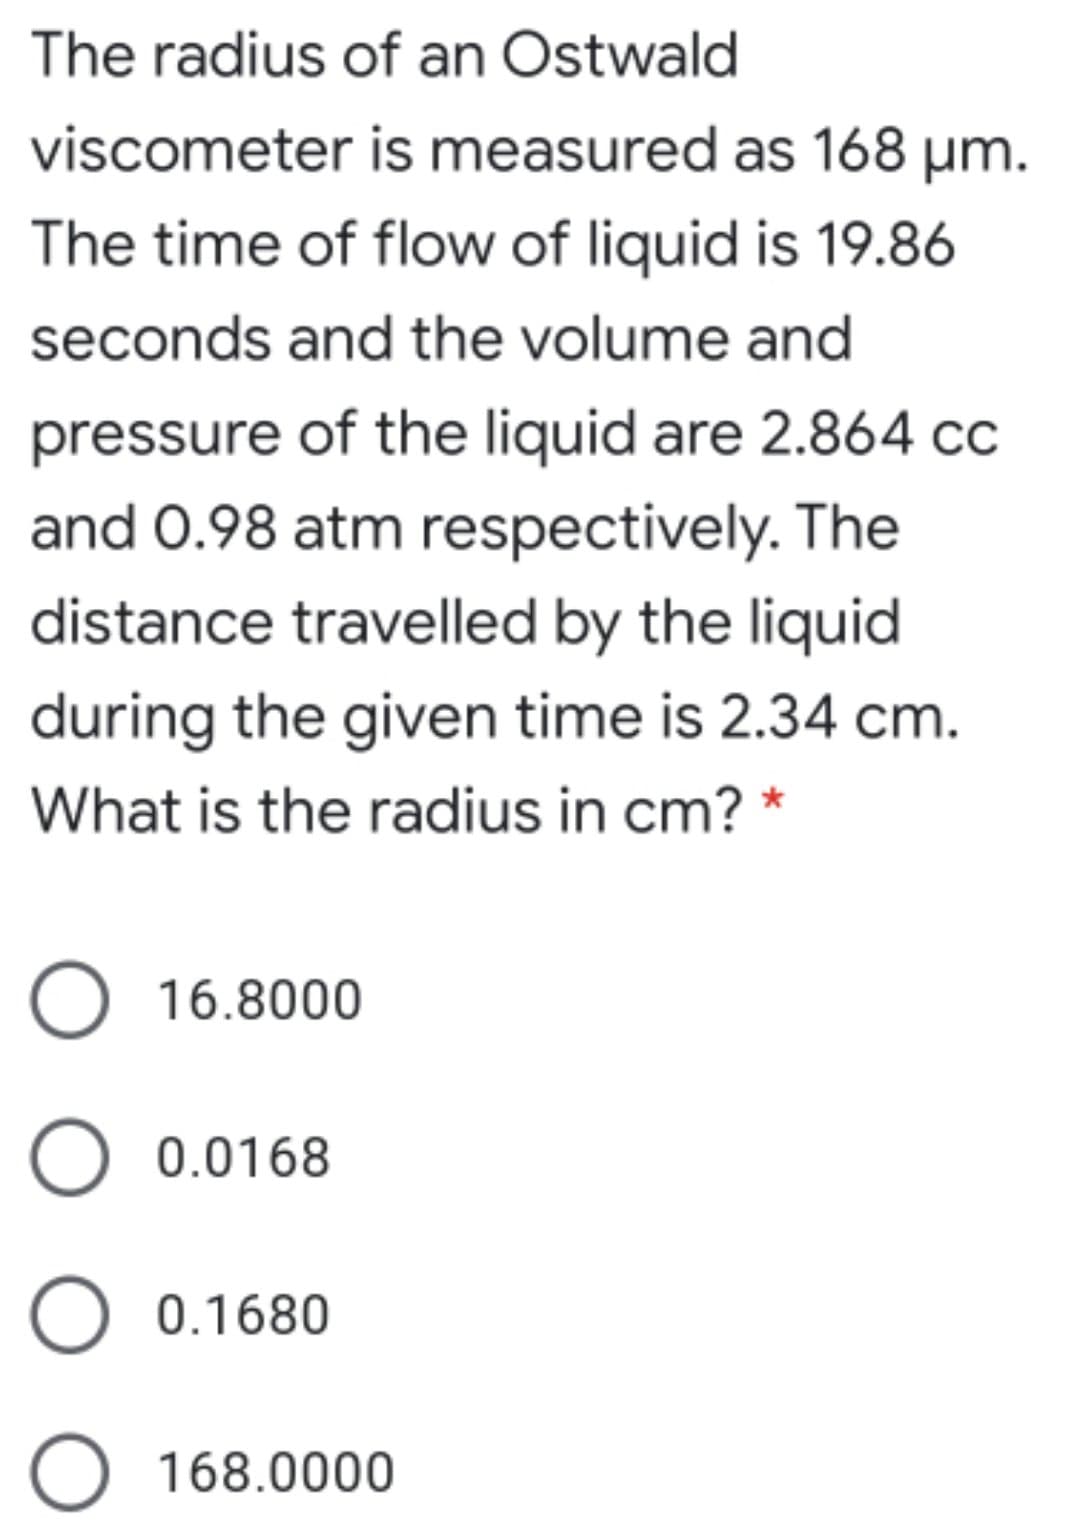 The radius of an Ostwald
viscometer is measured as 168 µm.
The time of flow of liquid is 19.86
seconds and the volume and
pressure of the liquid are 2.864 cc
and 0.98 atm respectively. The
distance travelled by the liquid
during the given time is 2.34 cm.
What is the radius in cm? *
O 16.8000
O 0.0168
O 0.1680
O 168.0000
